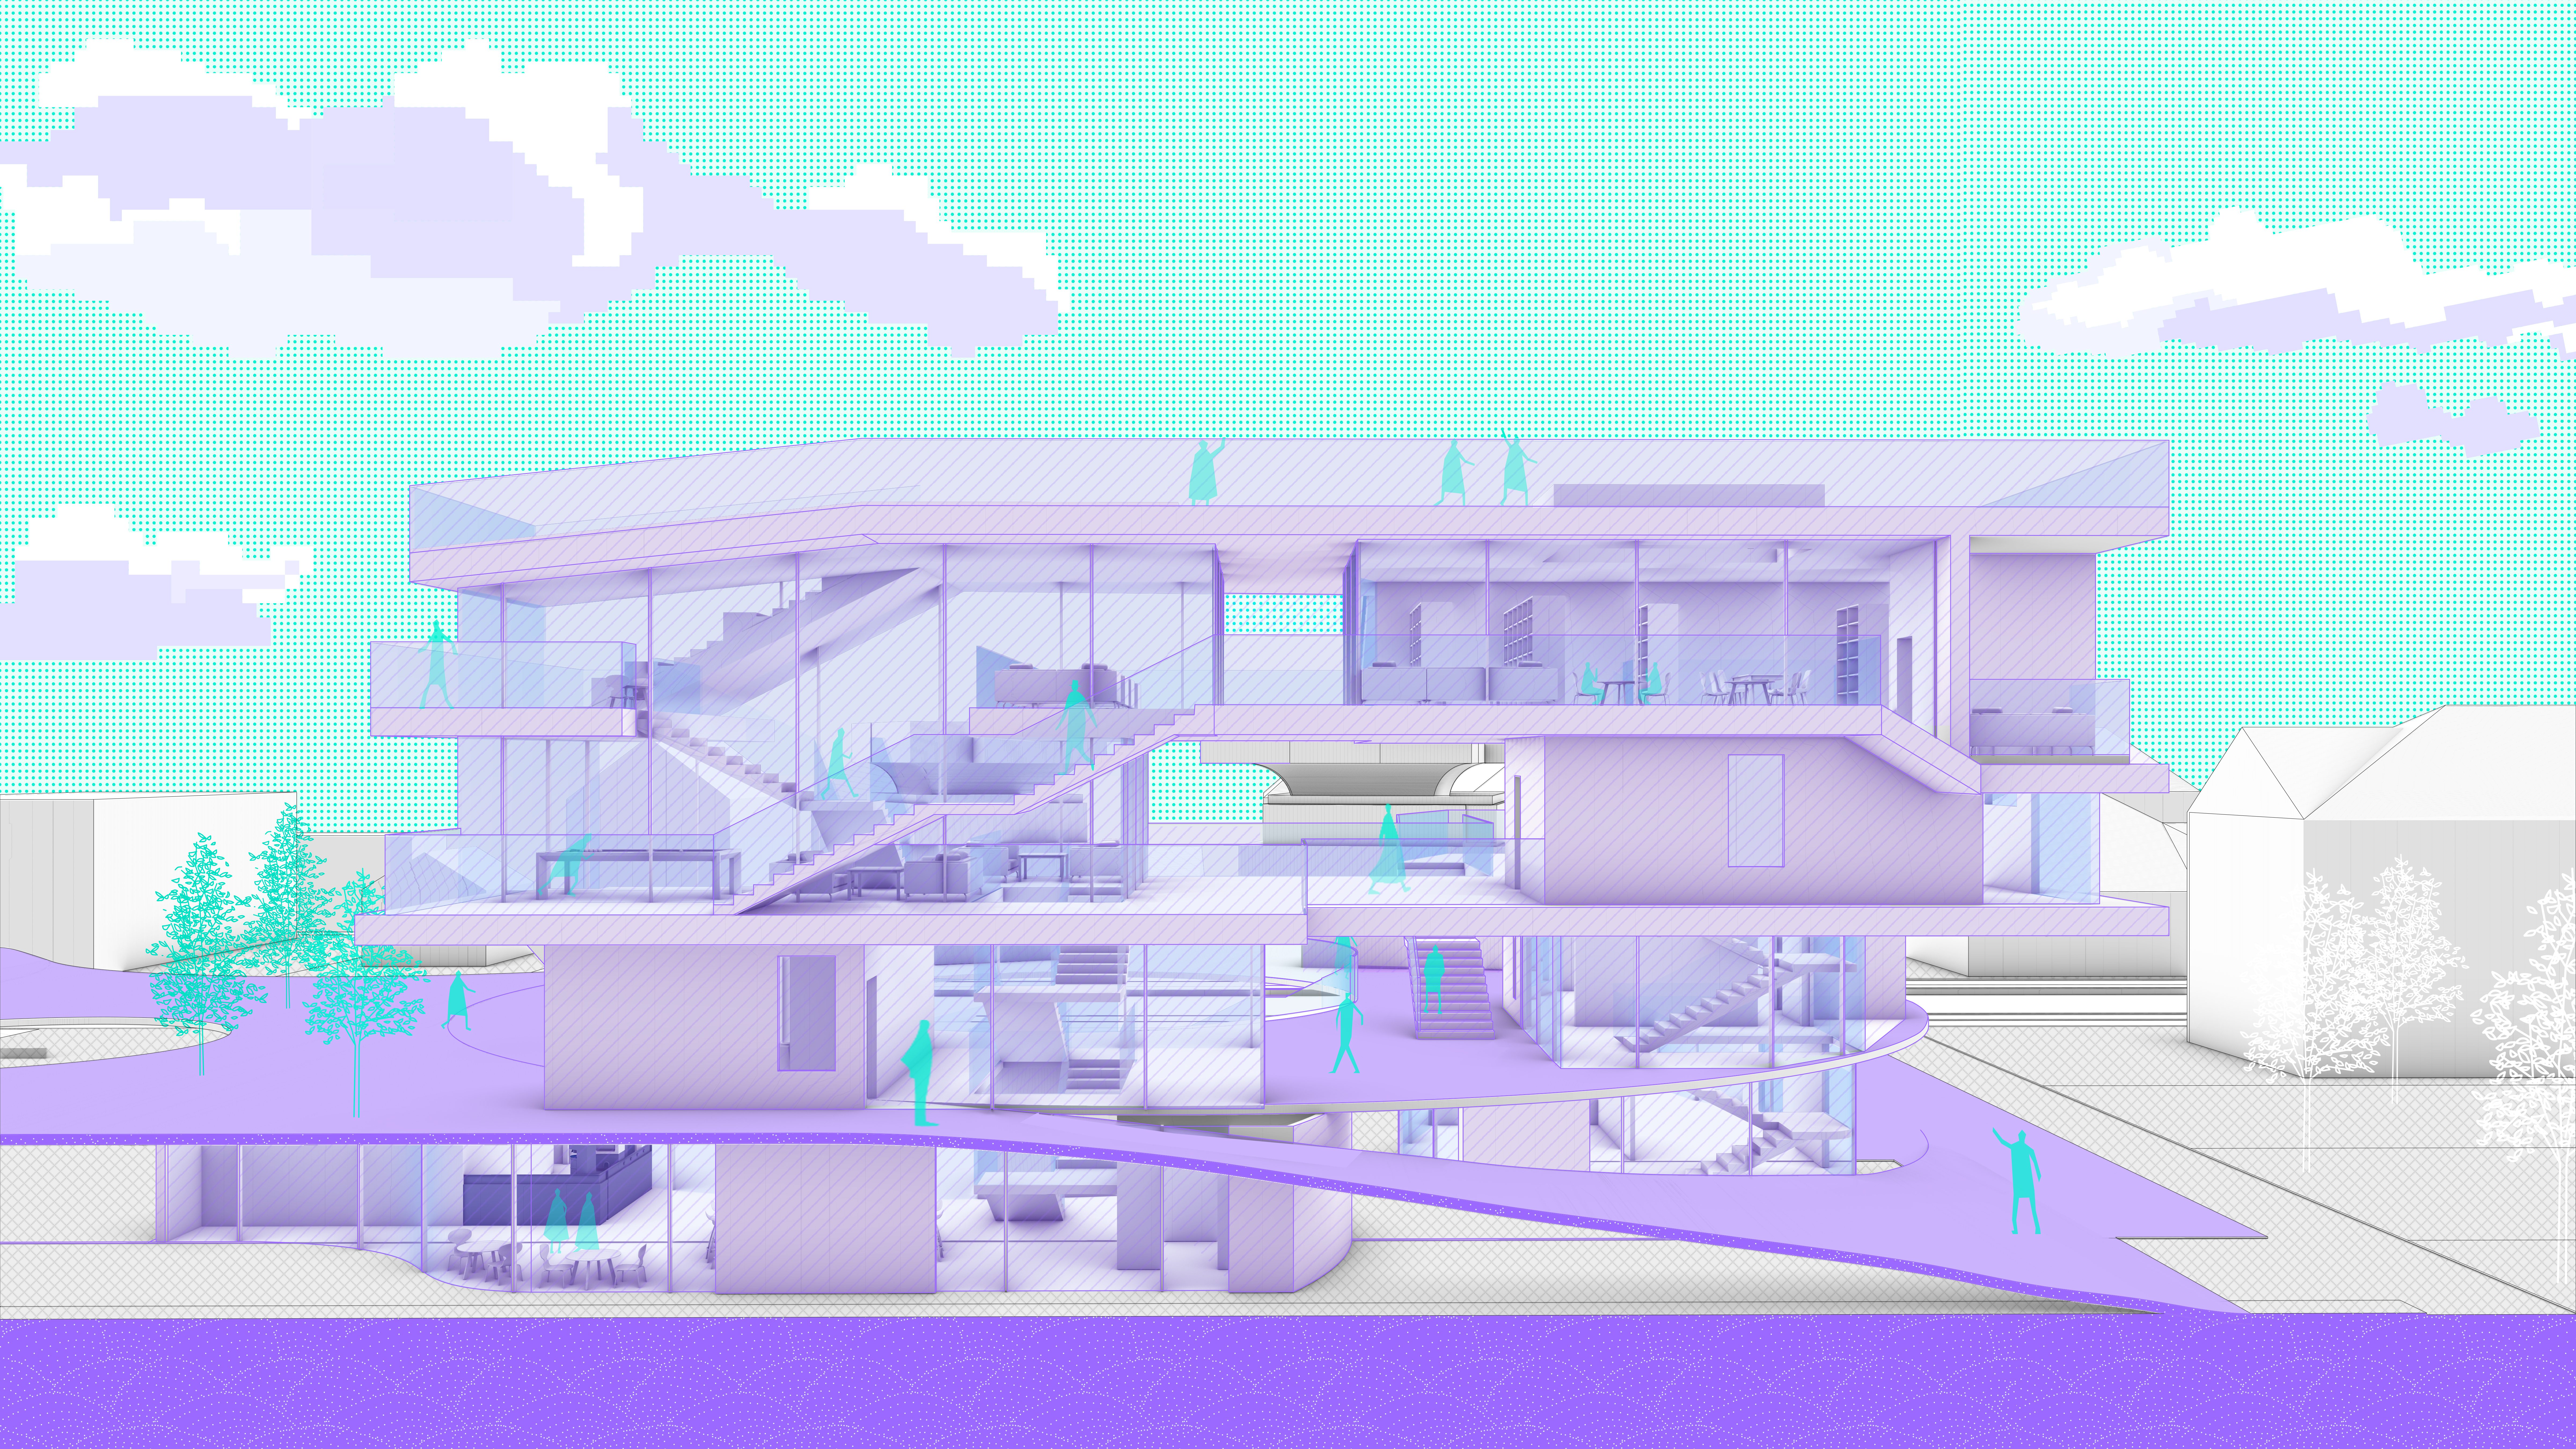 rendered elevations of purple, white and teal architecture building